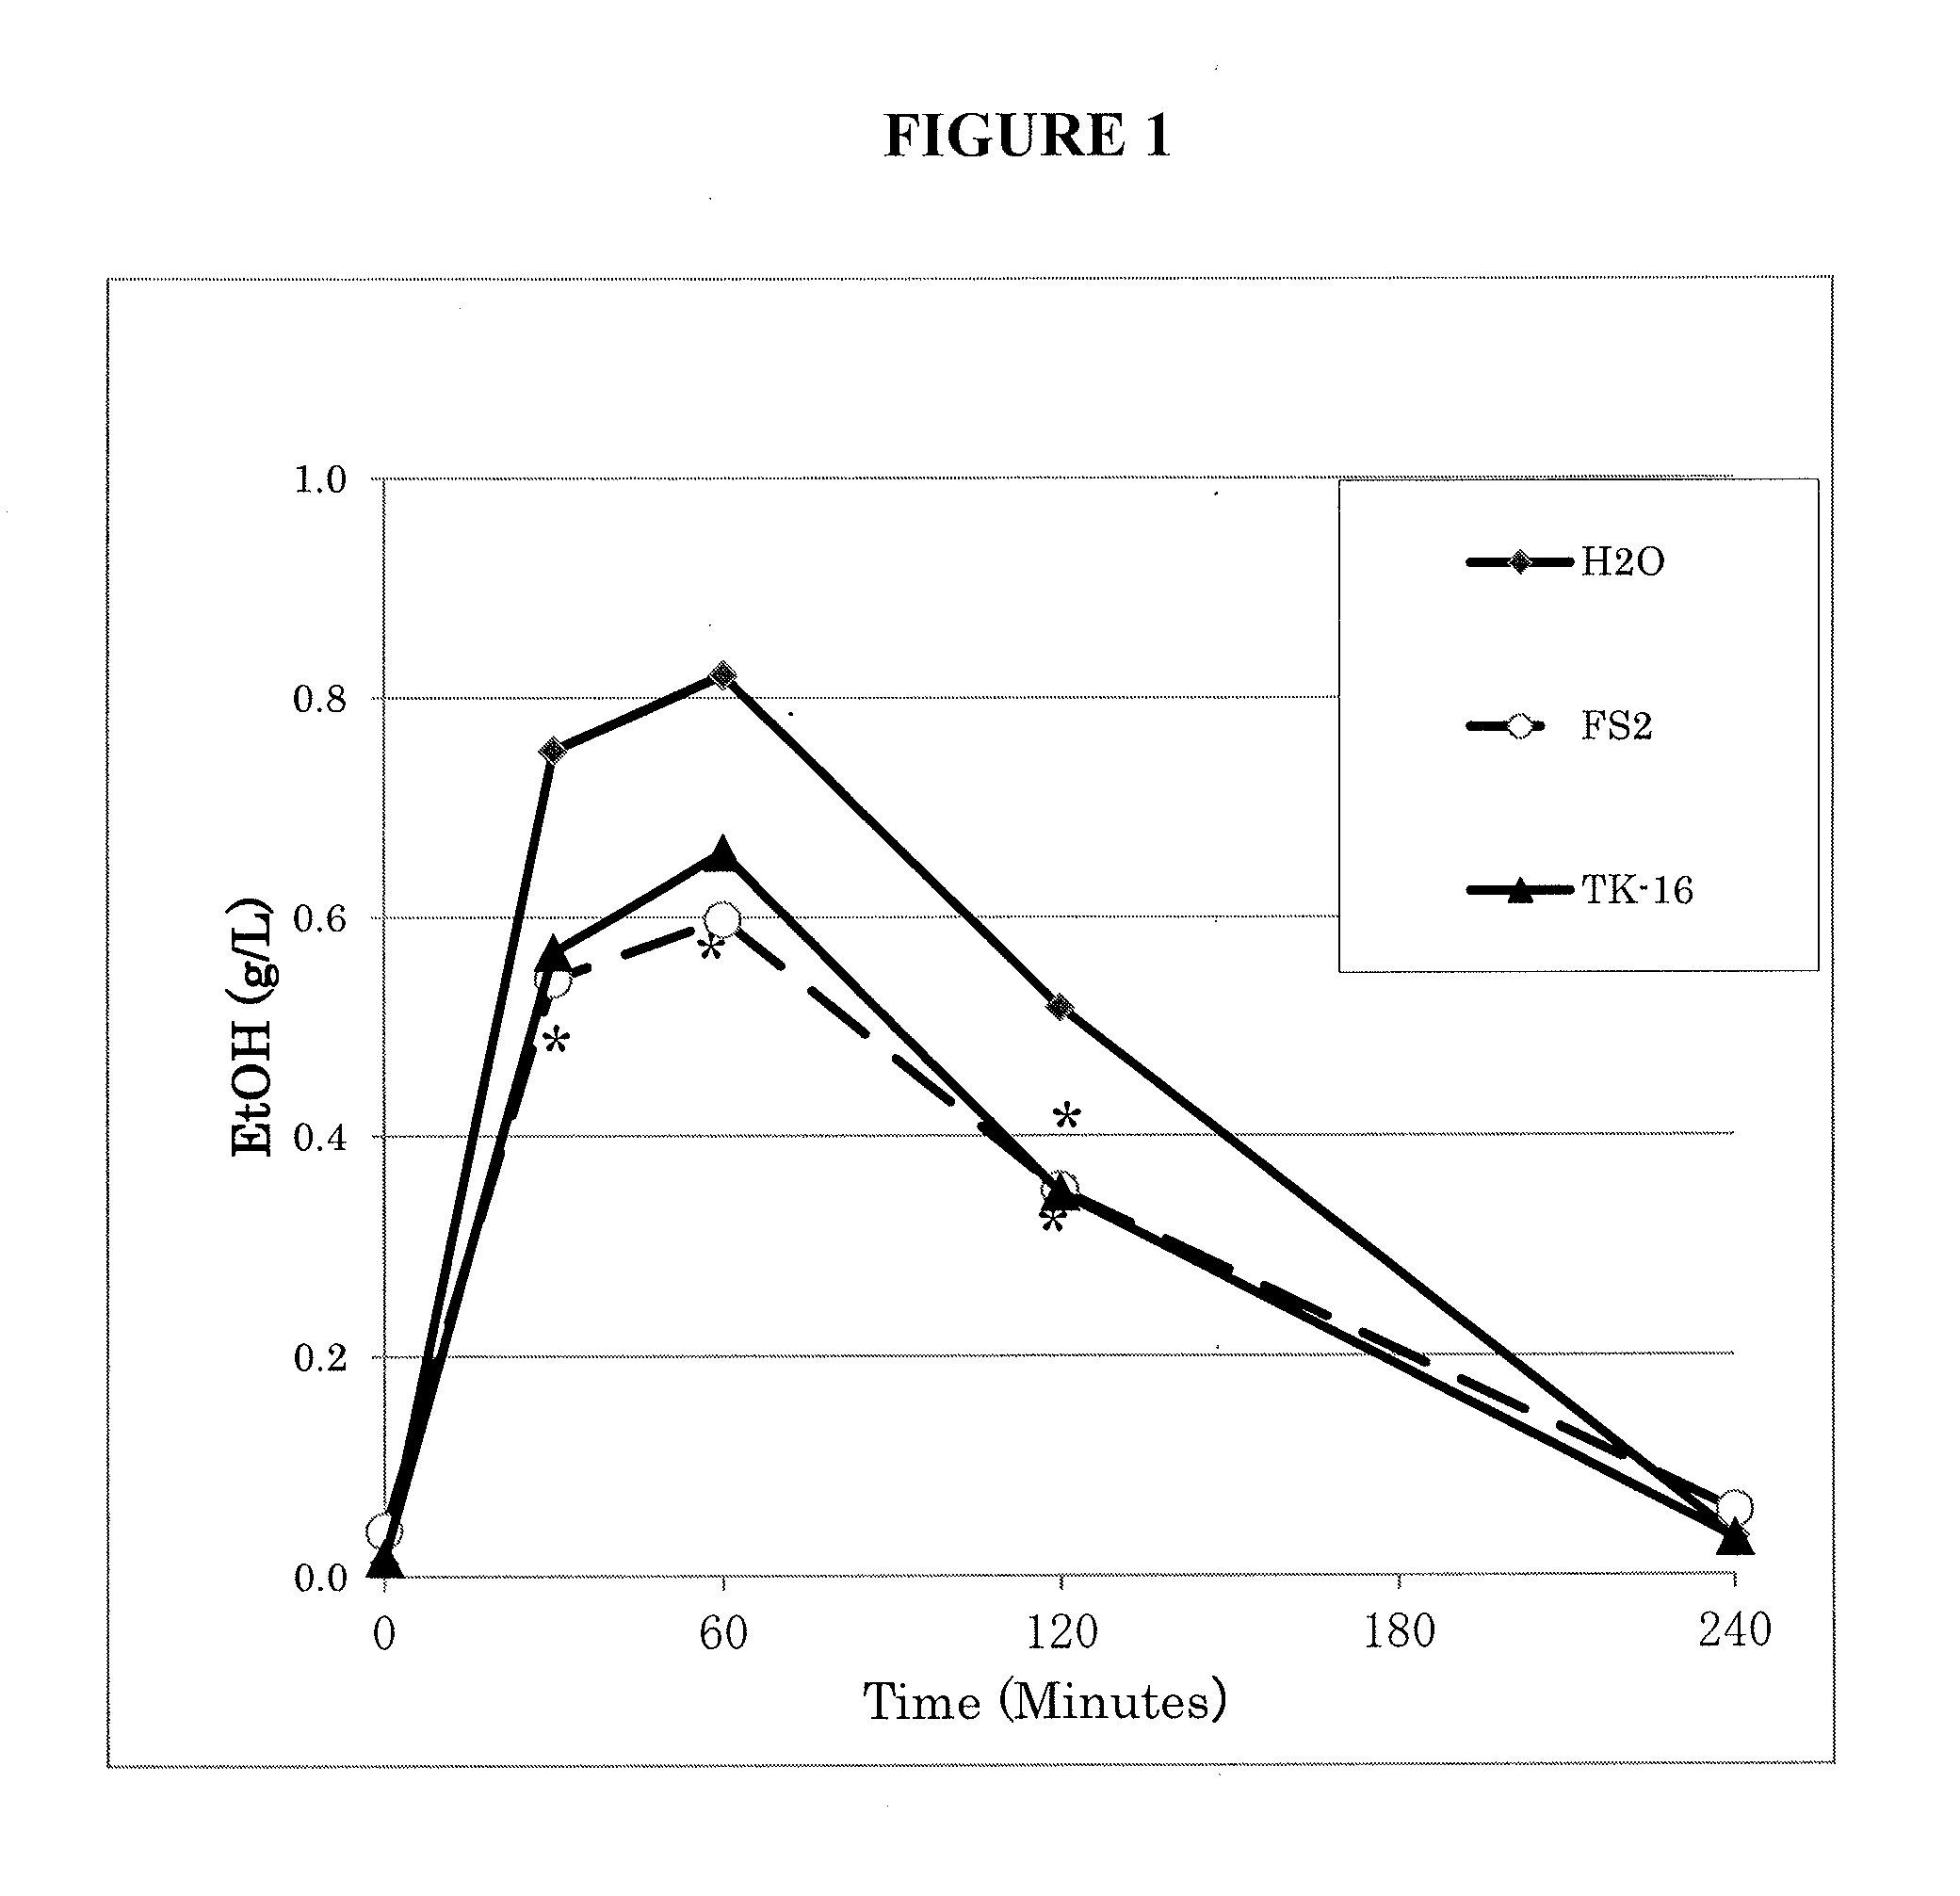 Agent for suppressing elevation of blood alcohol concentration